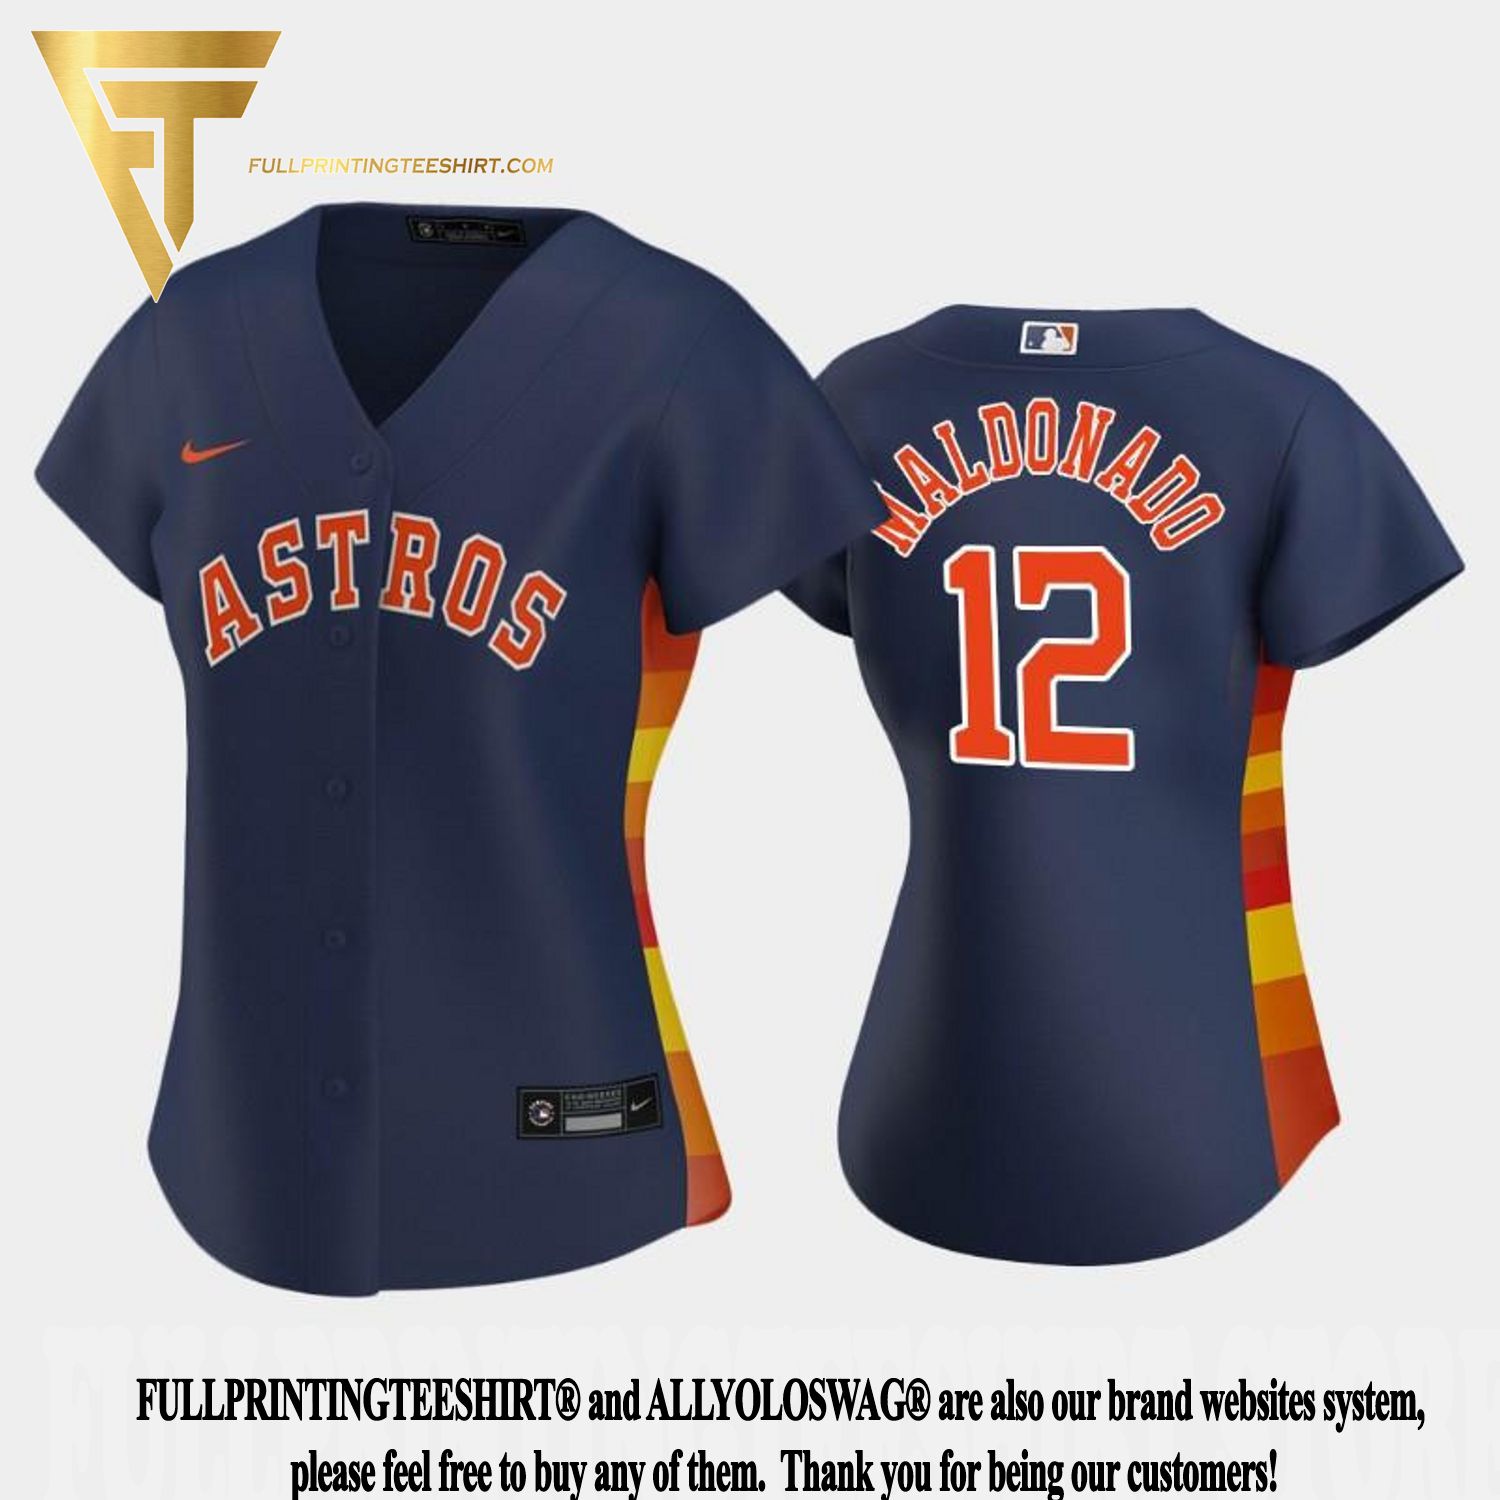 the new astros jersey